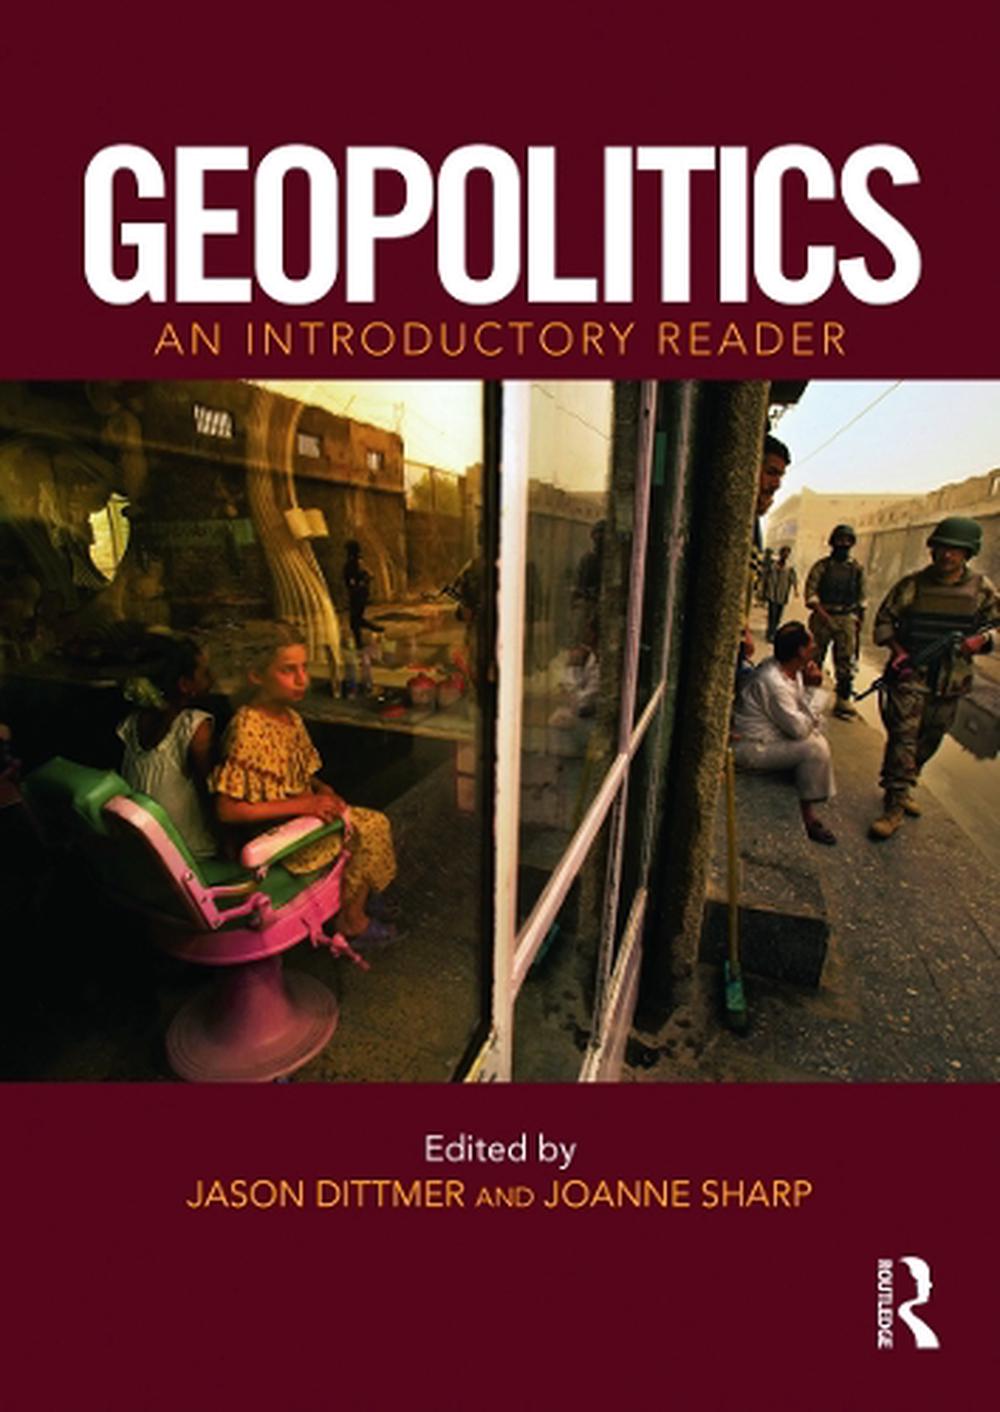 Geopolitics An Introductory Reader by Jason Dittmer (English